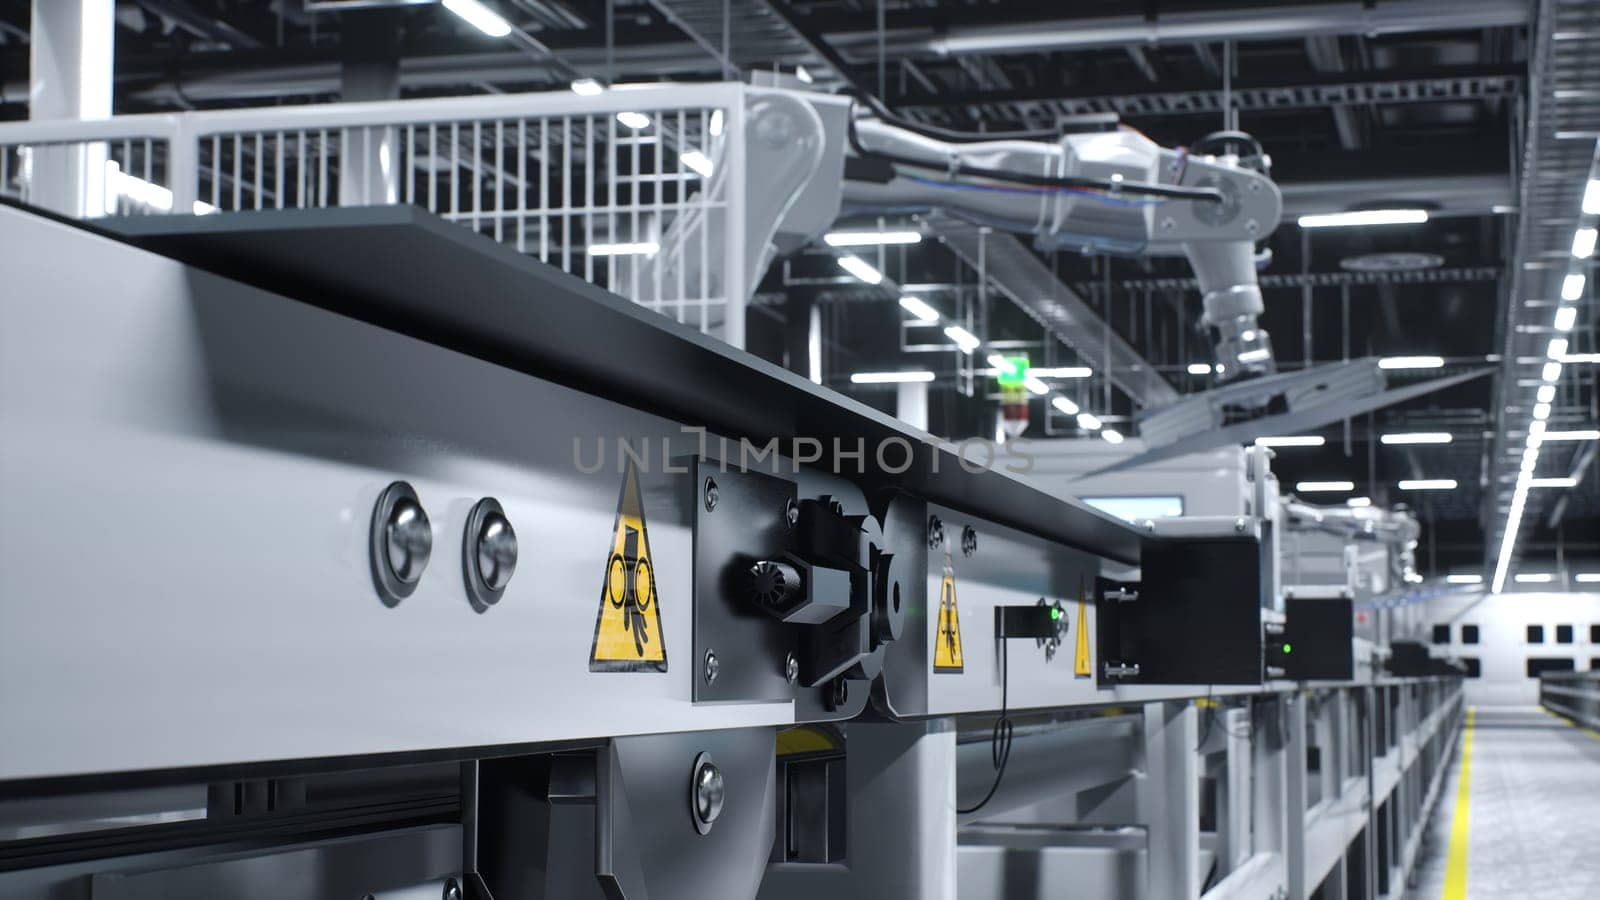 High voltage danger signs on conveyor belts in factory used to produce solar panels, close up shot. Safety measures stickers on production lines in facility manufacturing PV cells, 3D illustration